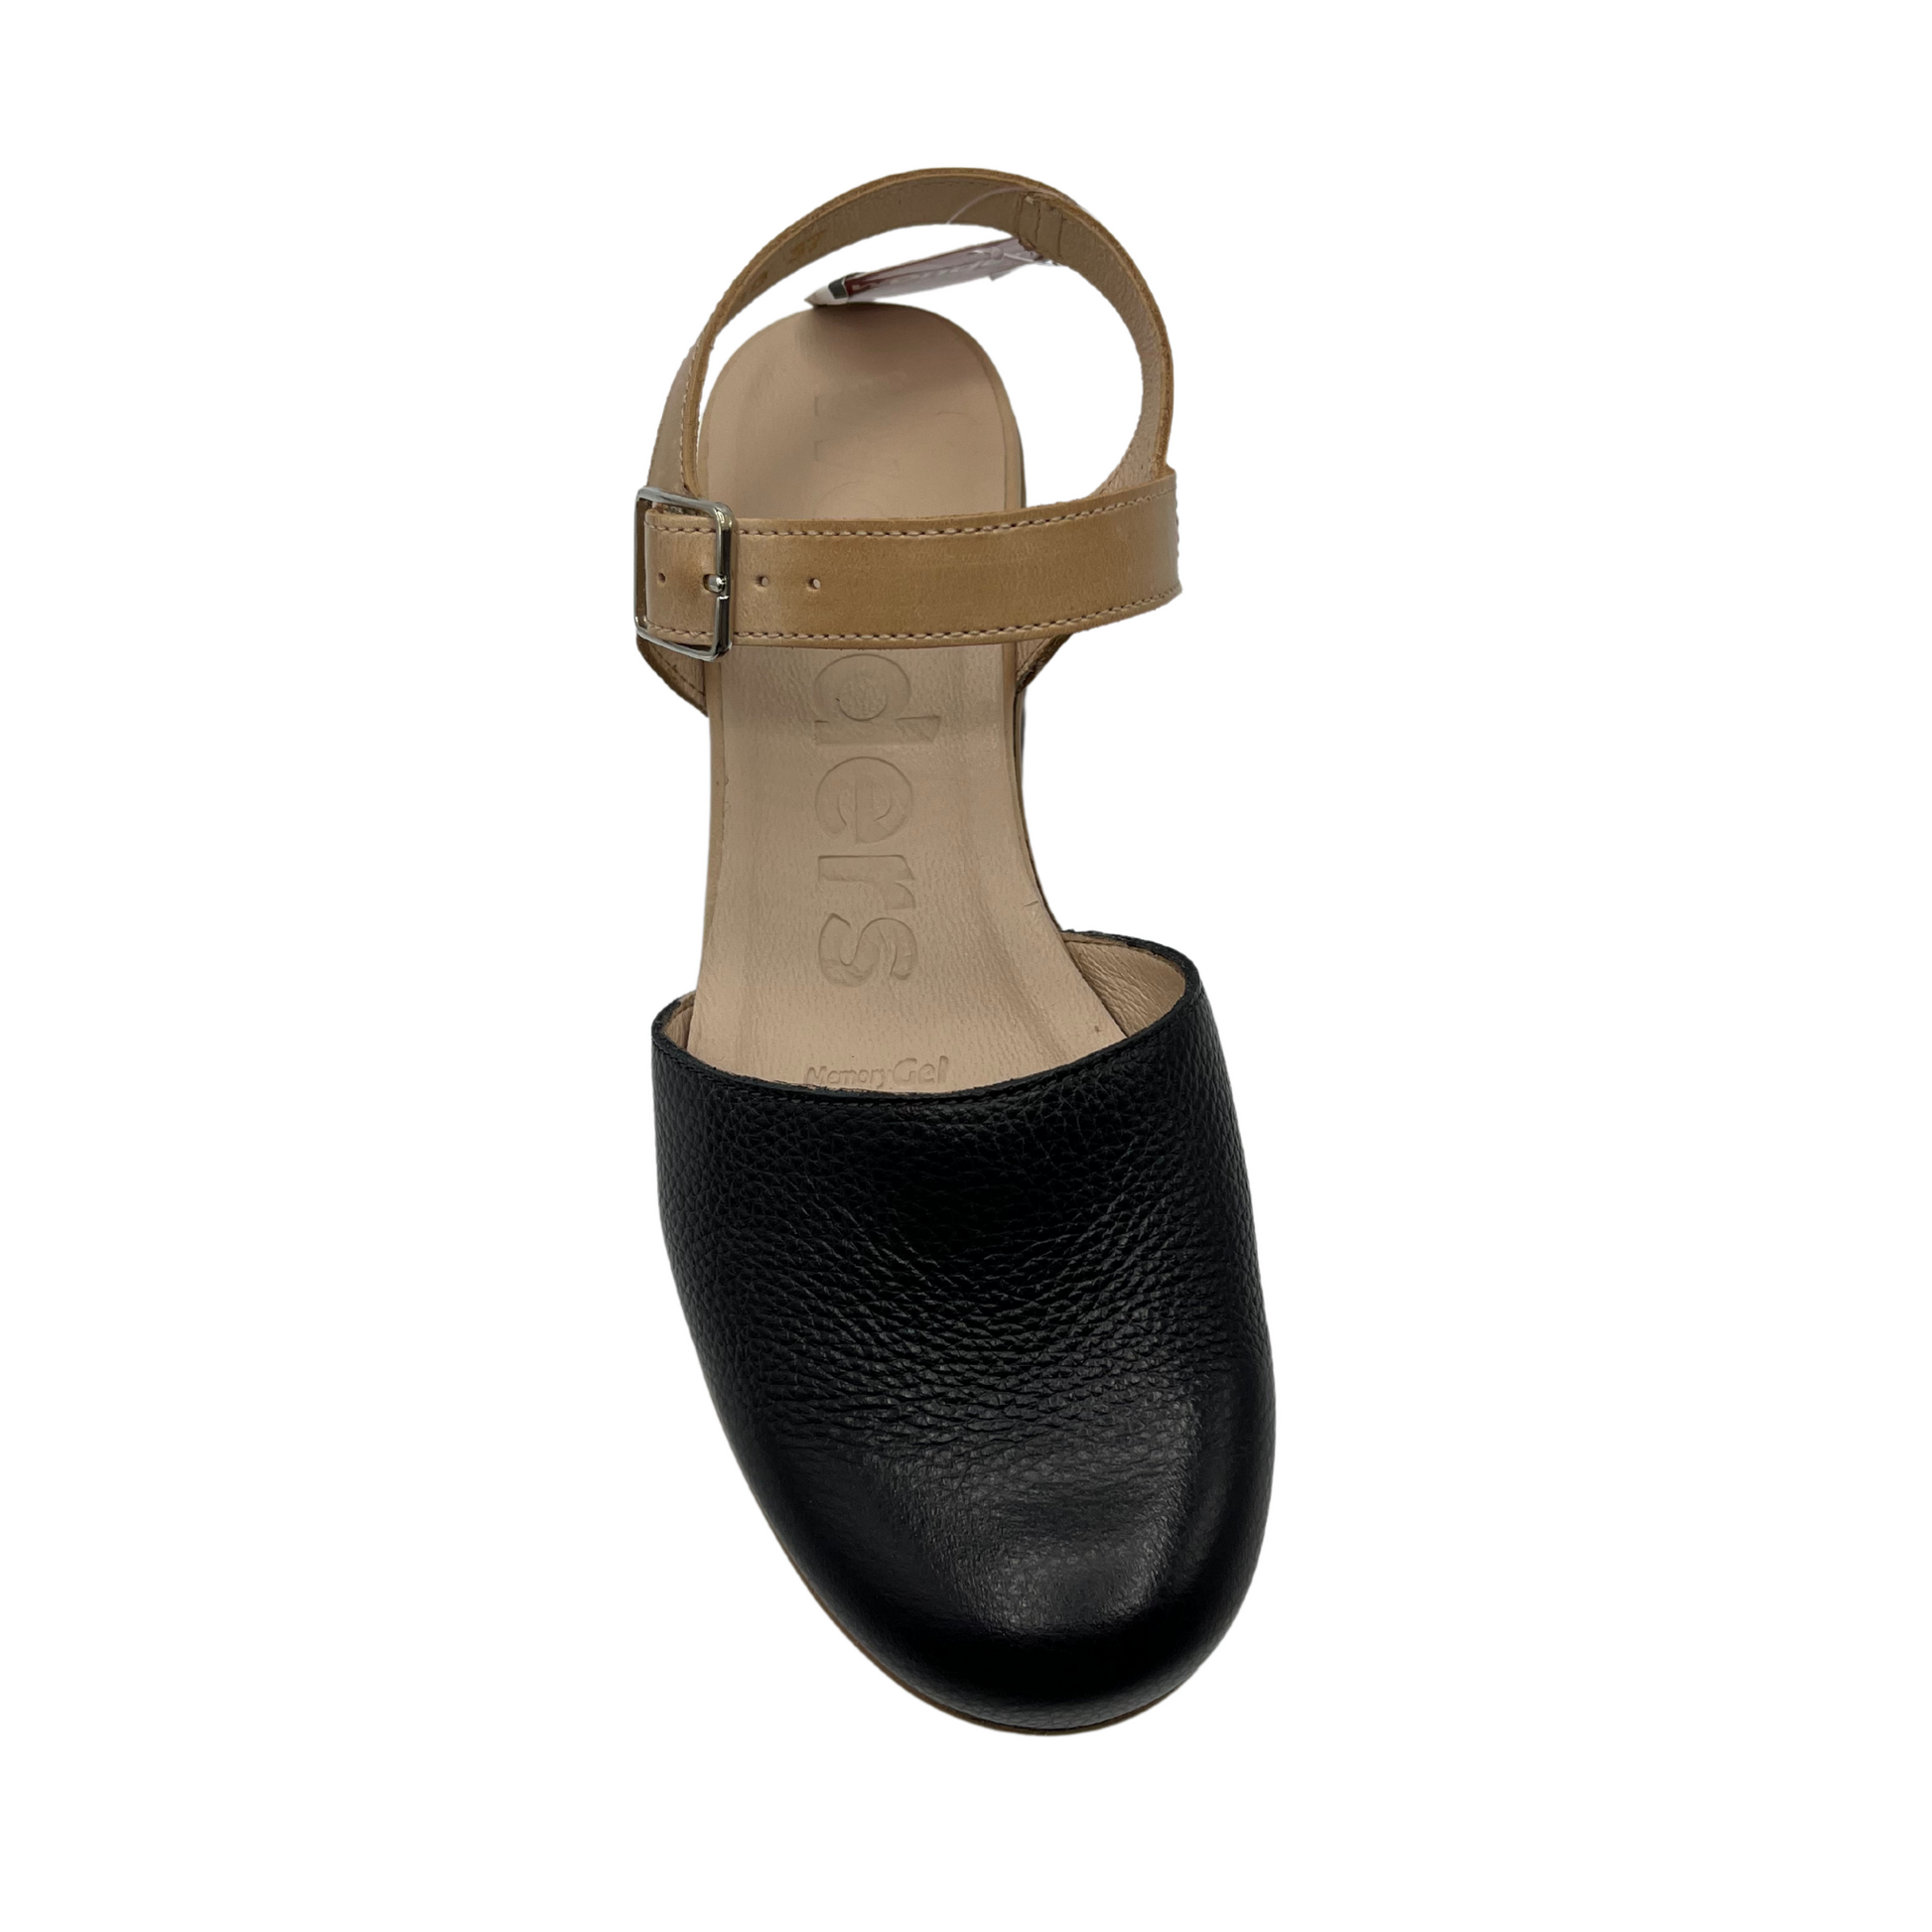 Top view of black and tan clog with ankle strap, rounded toe and chunky sole